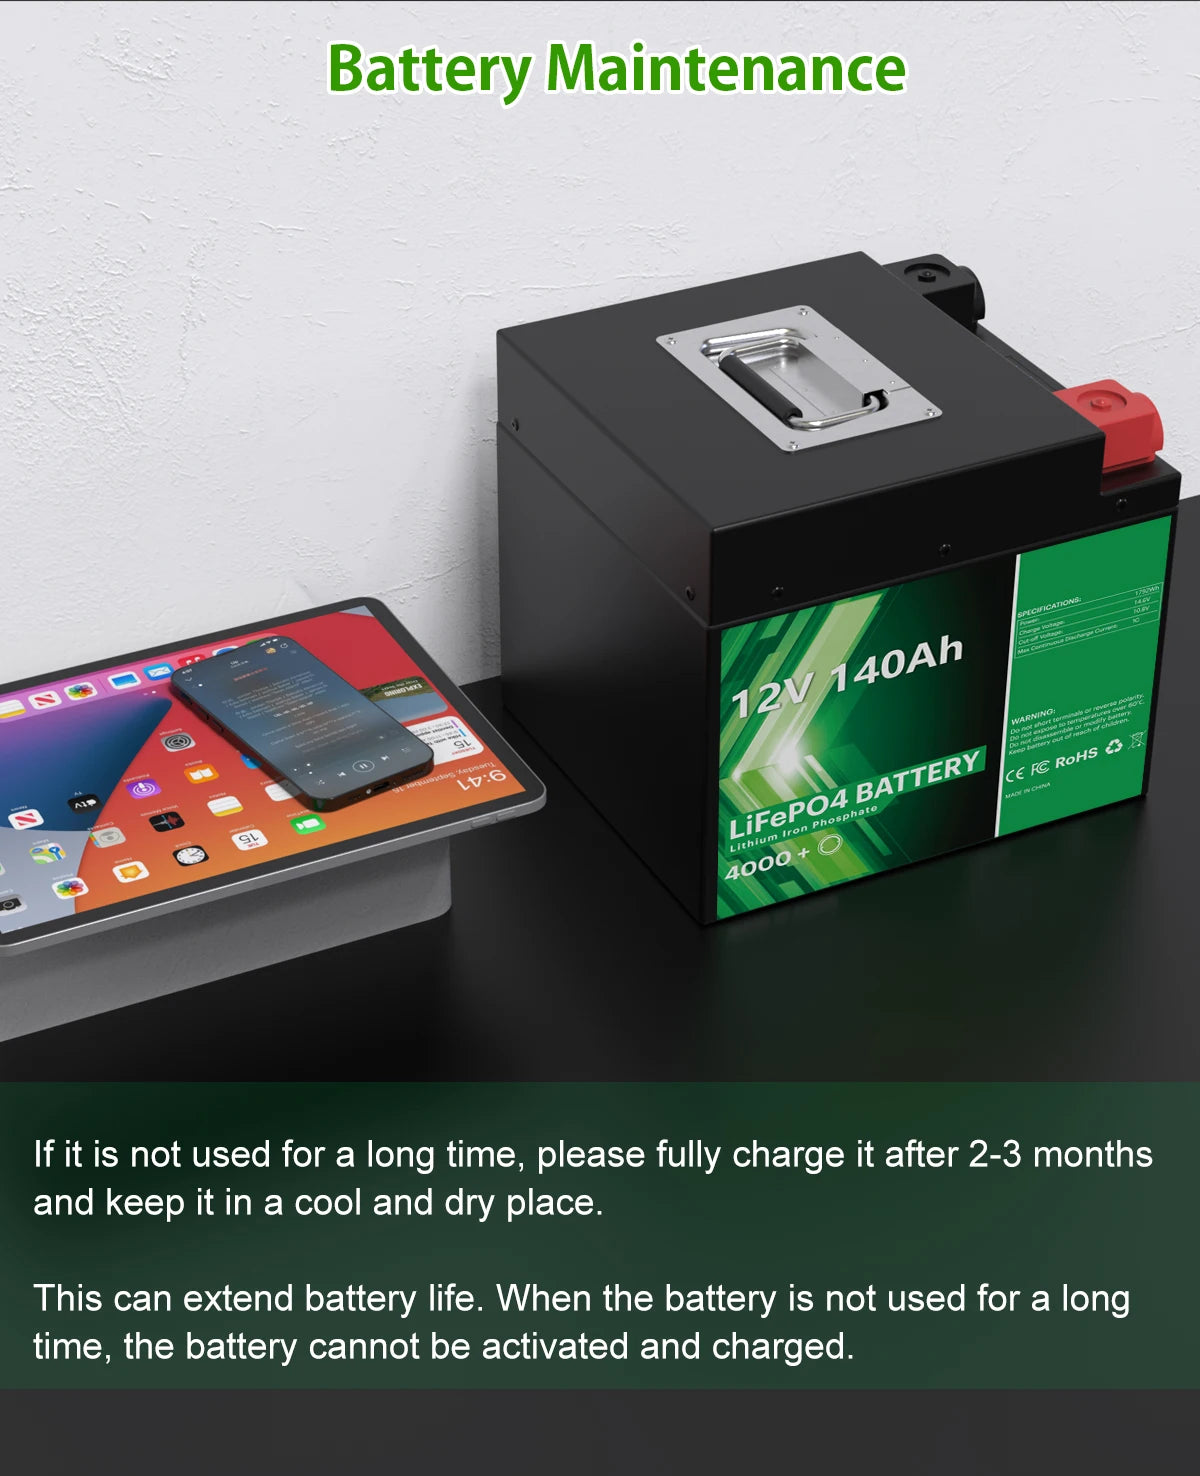 12V 140Ah LiFePO4 Battery, Store battery in cool, dry place with occasional charging to prolong life.